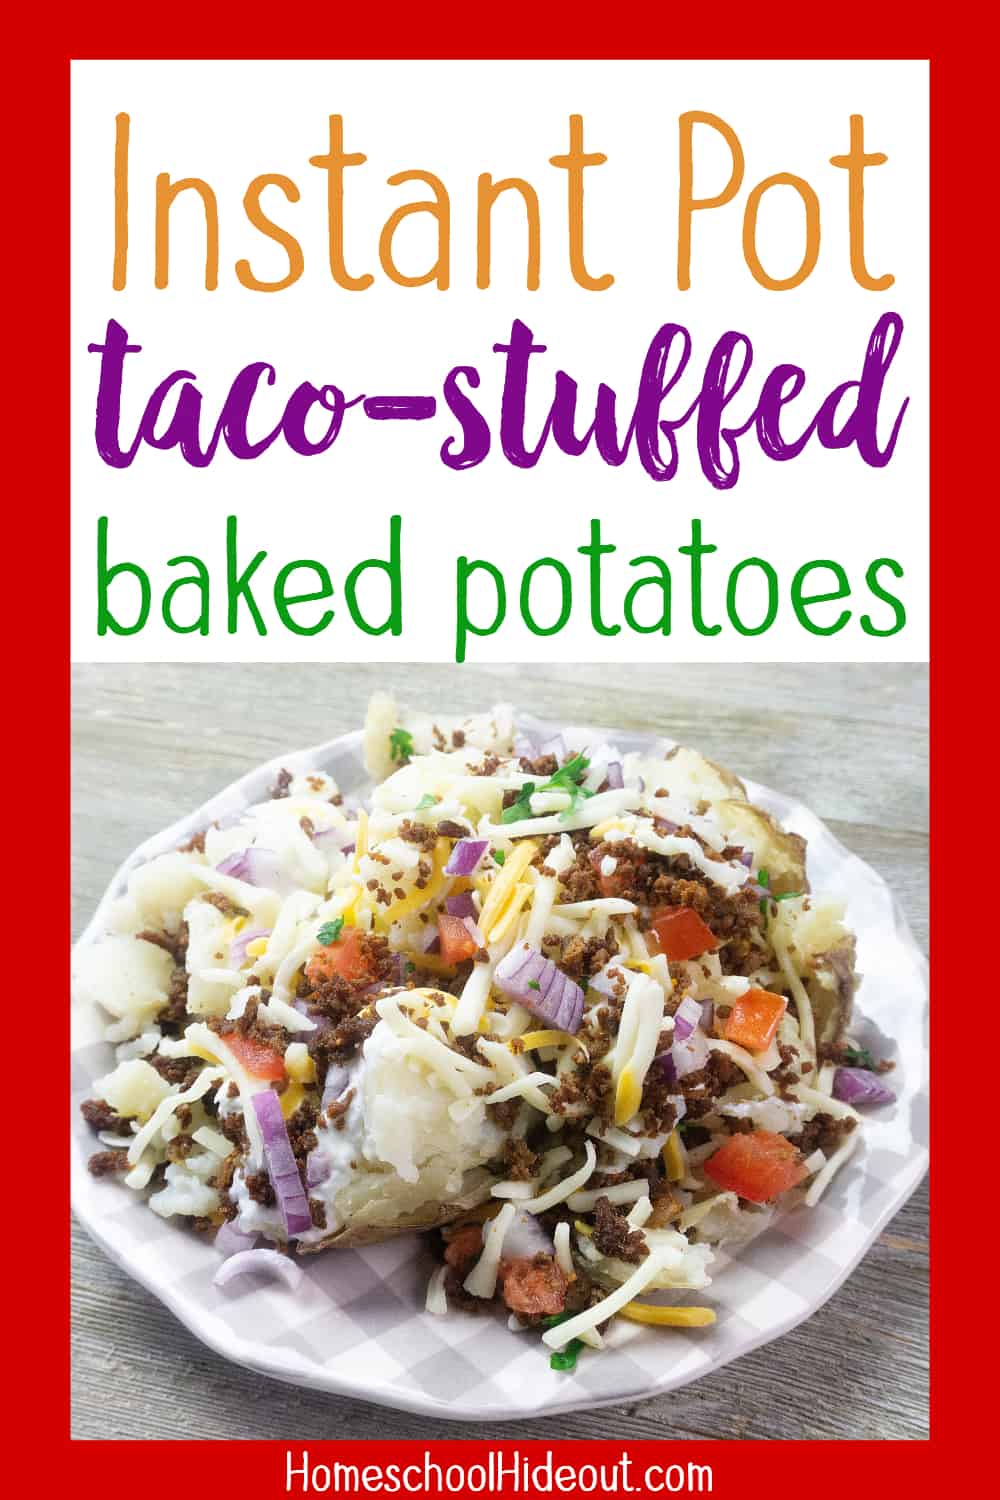 OMG! These taco-stuffed baked potatoes look so dang good. And, they can be made in the Instant Pot! I know what's for dinner tonight!